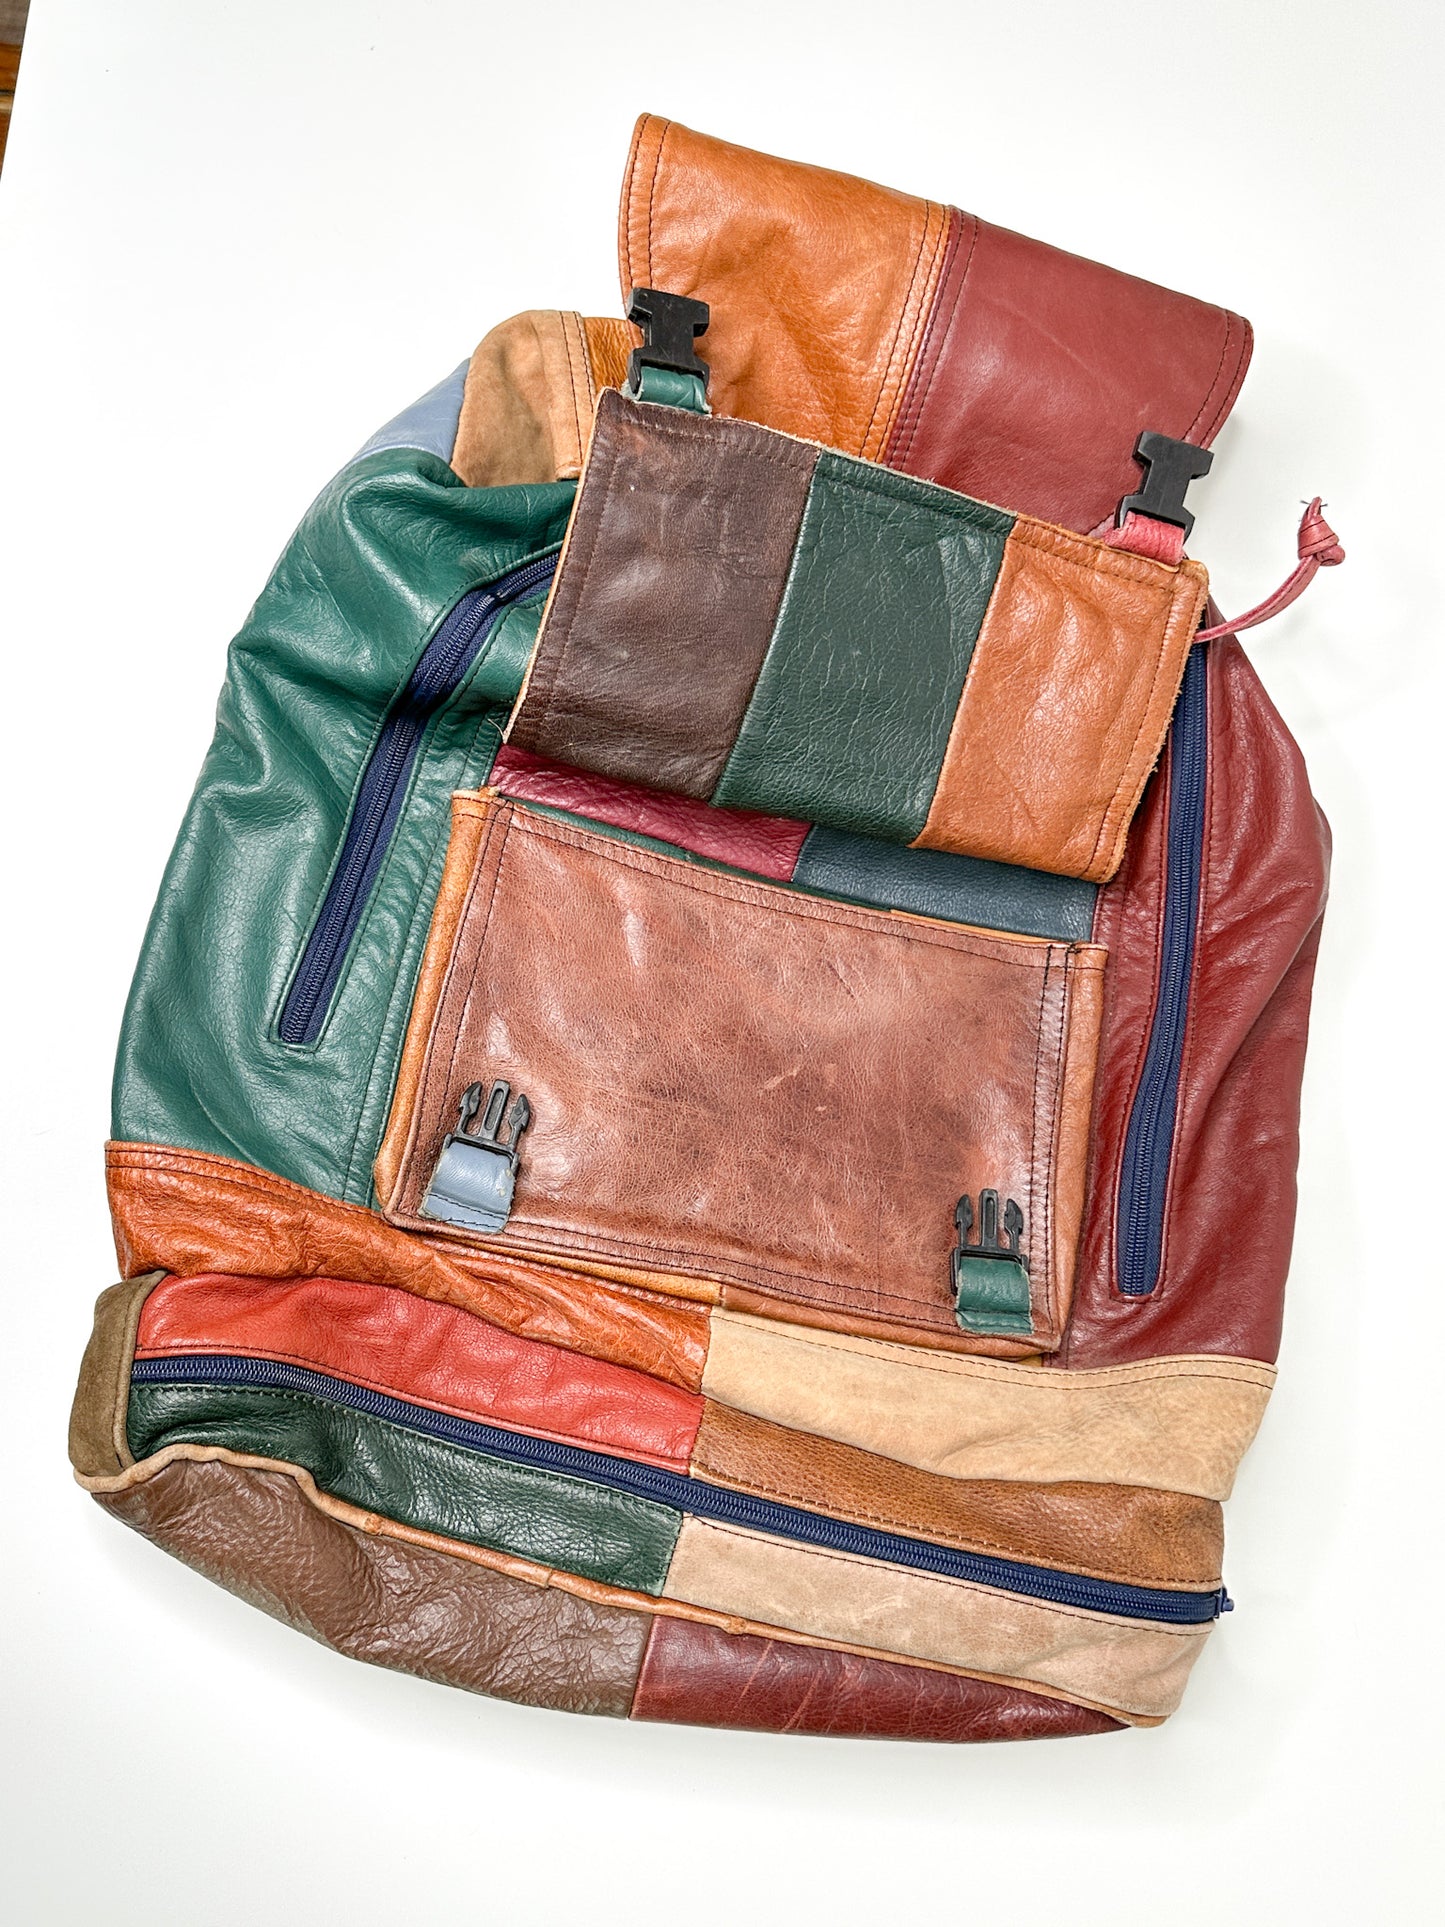 Vintage 1990s Leather Patchwork Backpack | 100% Leather Backpack | Patchwork Backpack